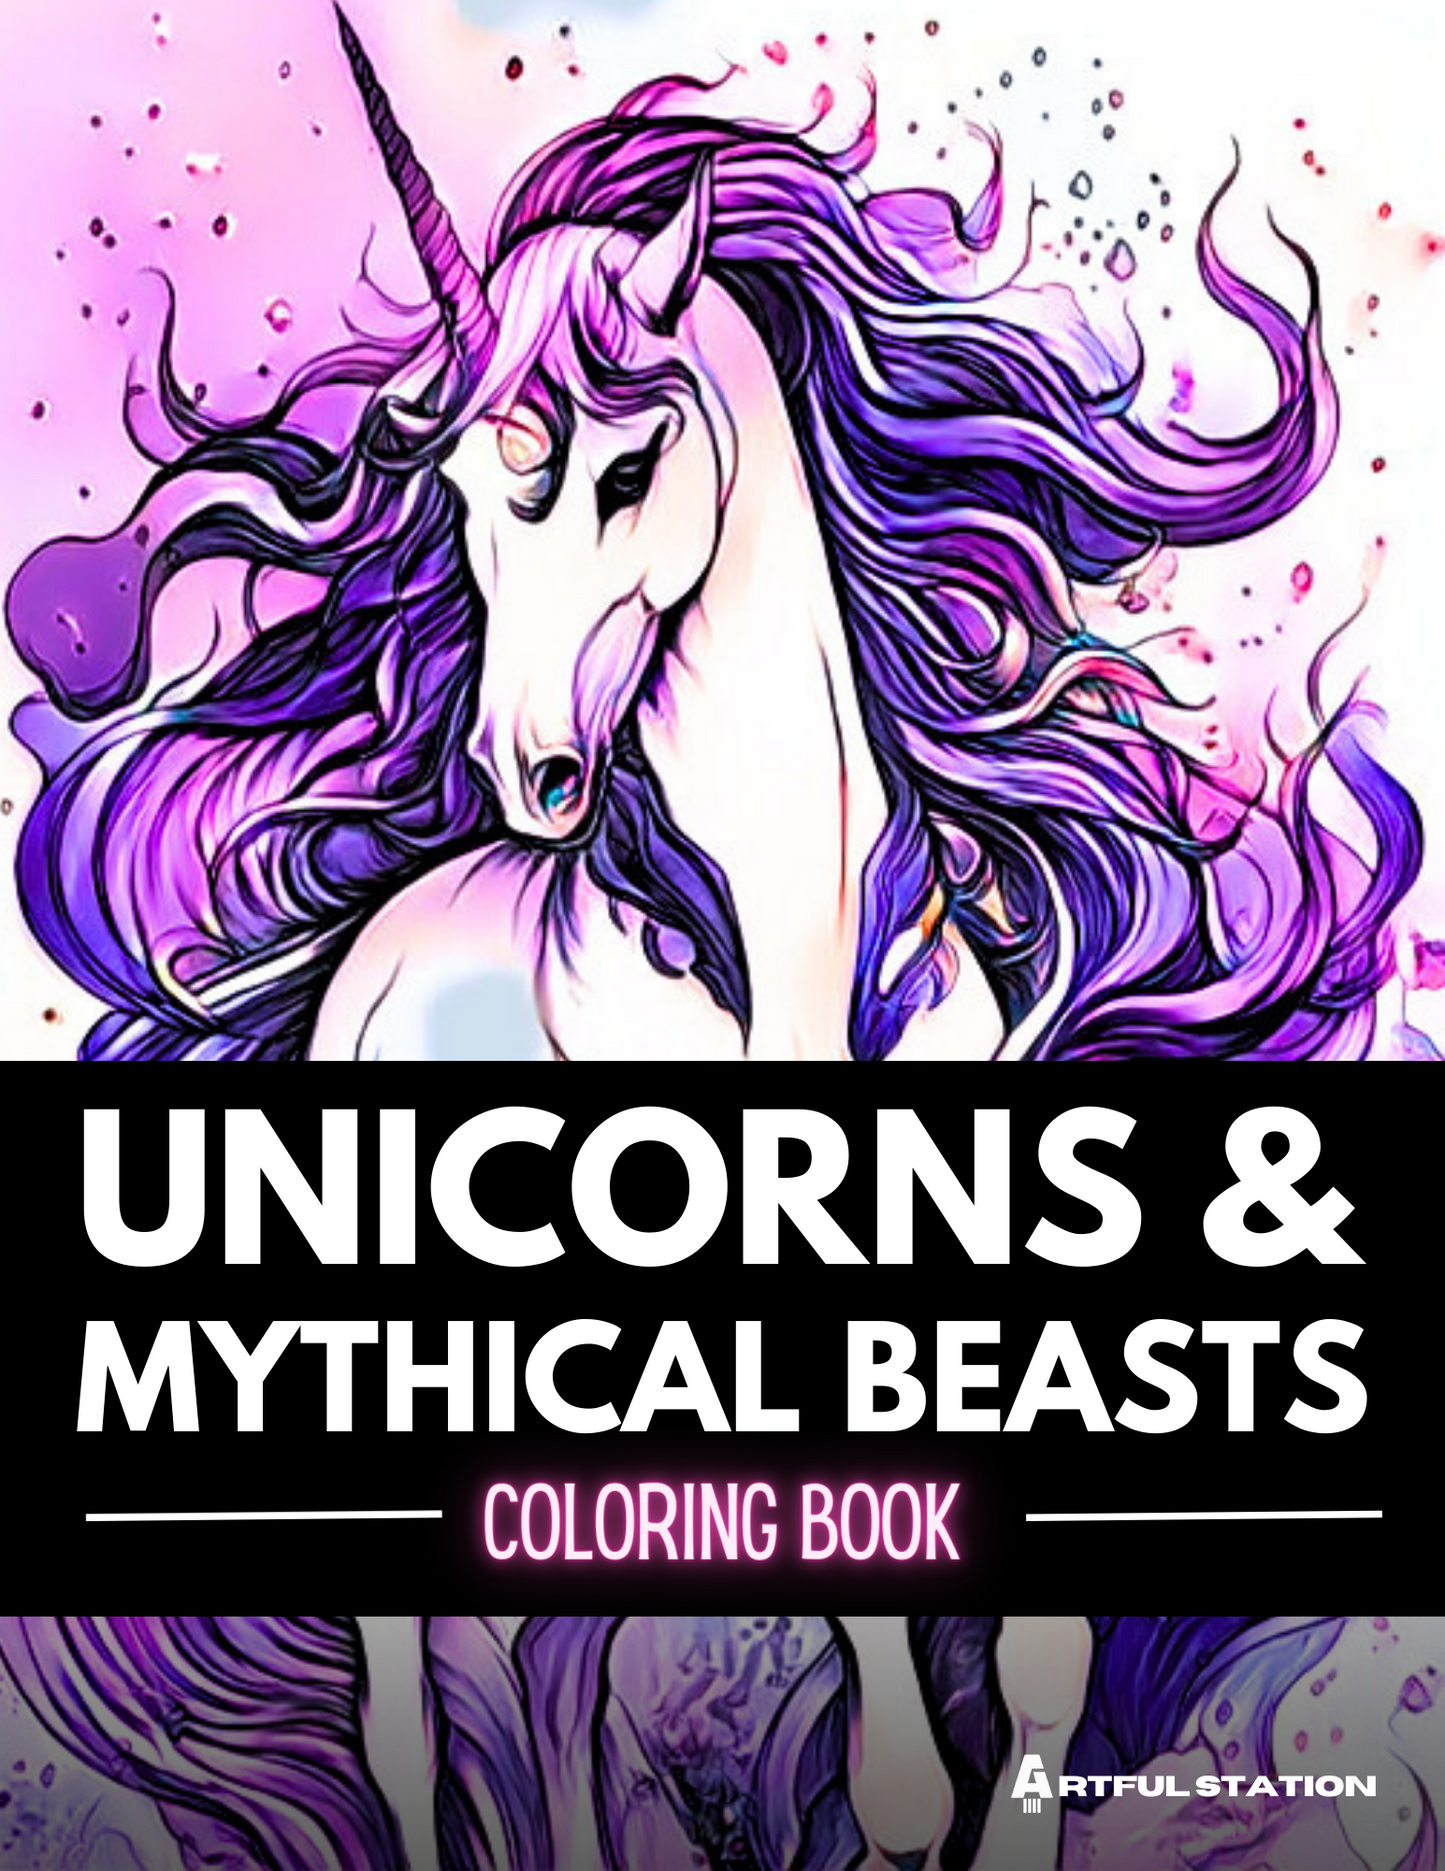 Unicorns & Mythical Beasts Adult Coloring Book